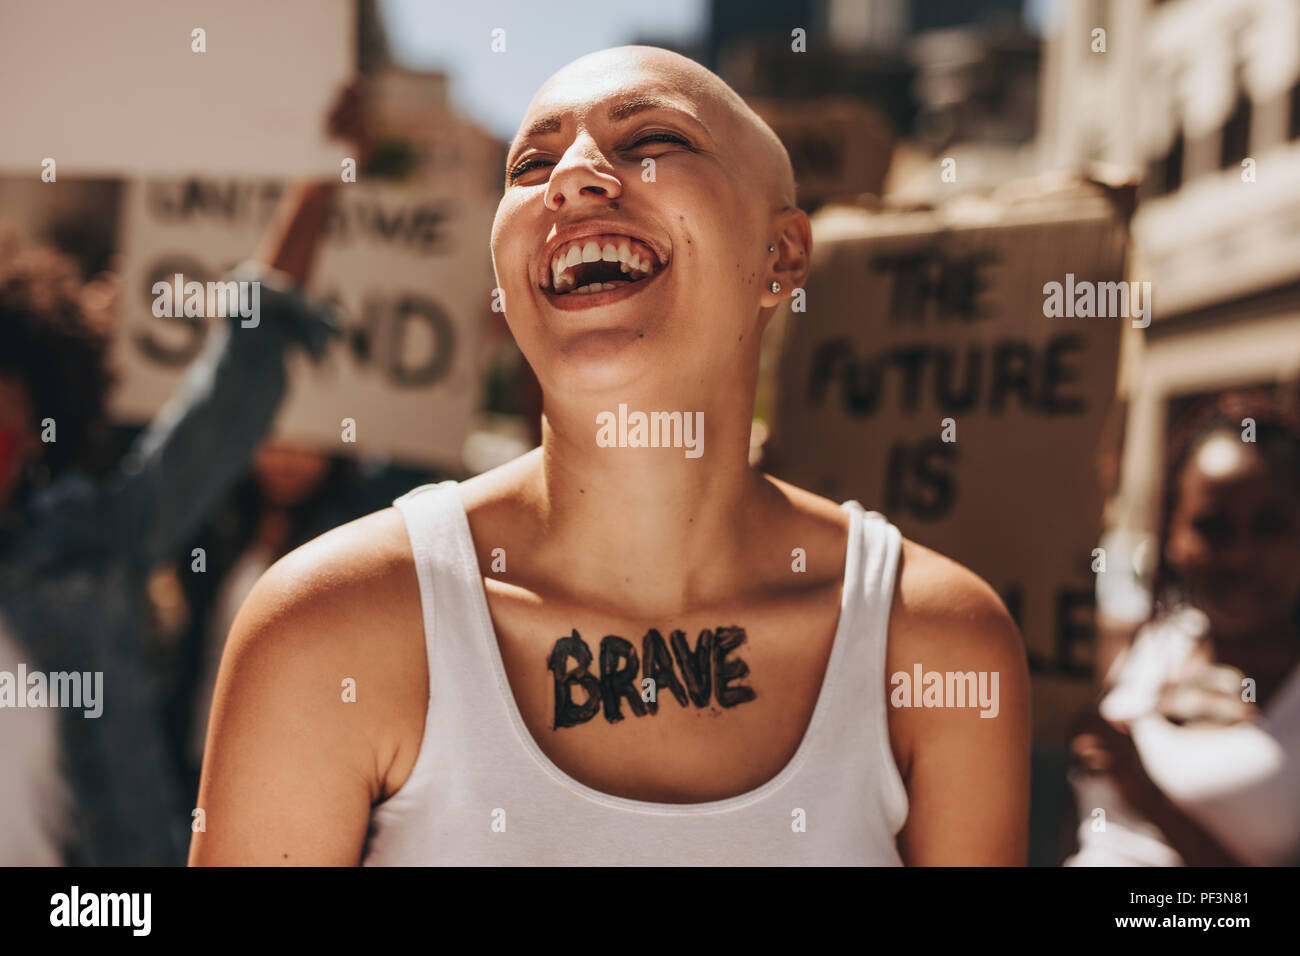 Bald woman laughing outdoors during a protest. Brave woman with group of protesters in background. Stock Photo